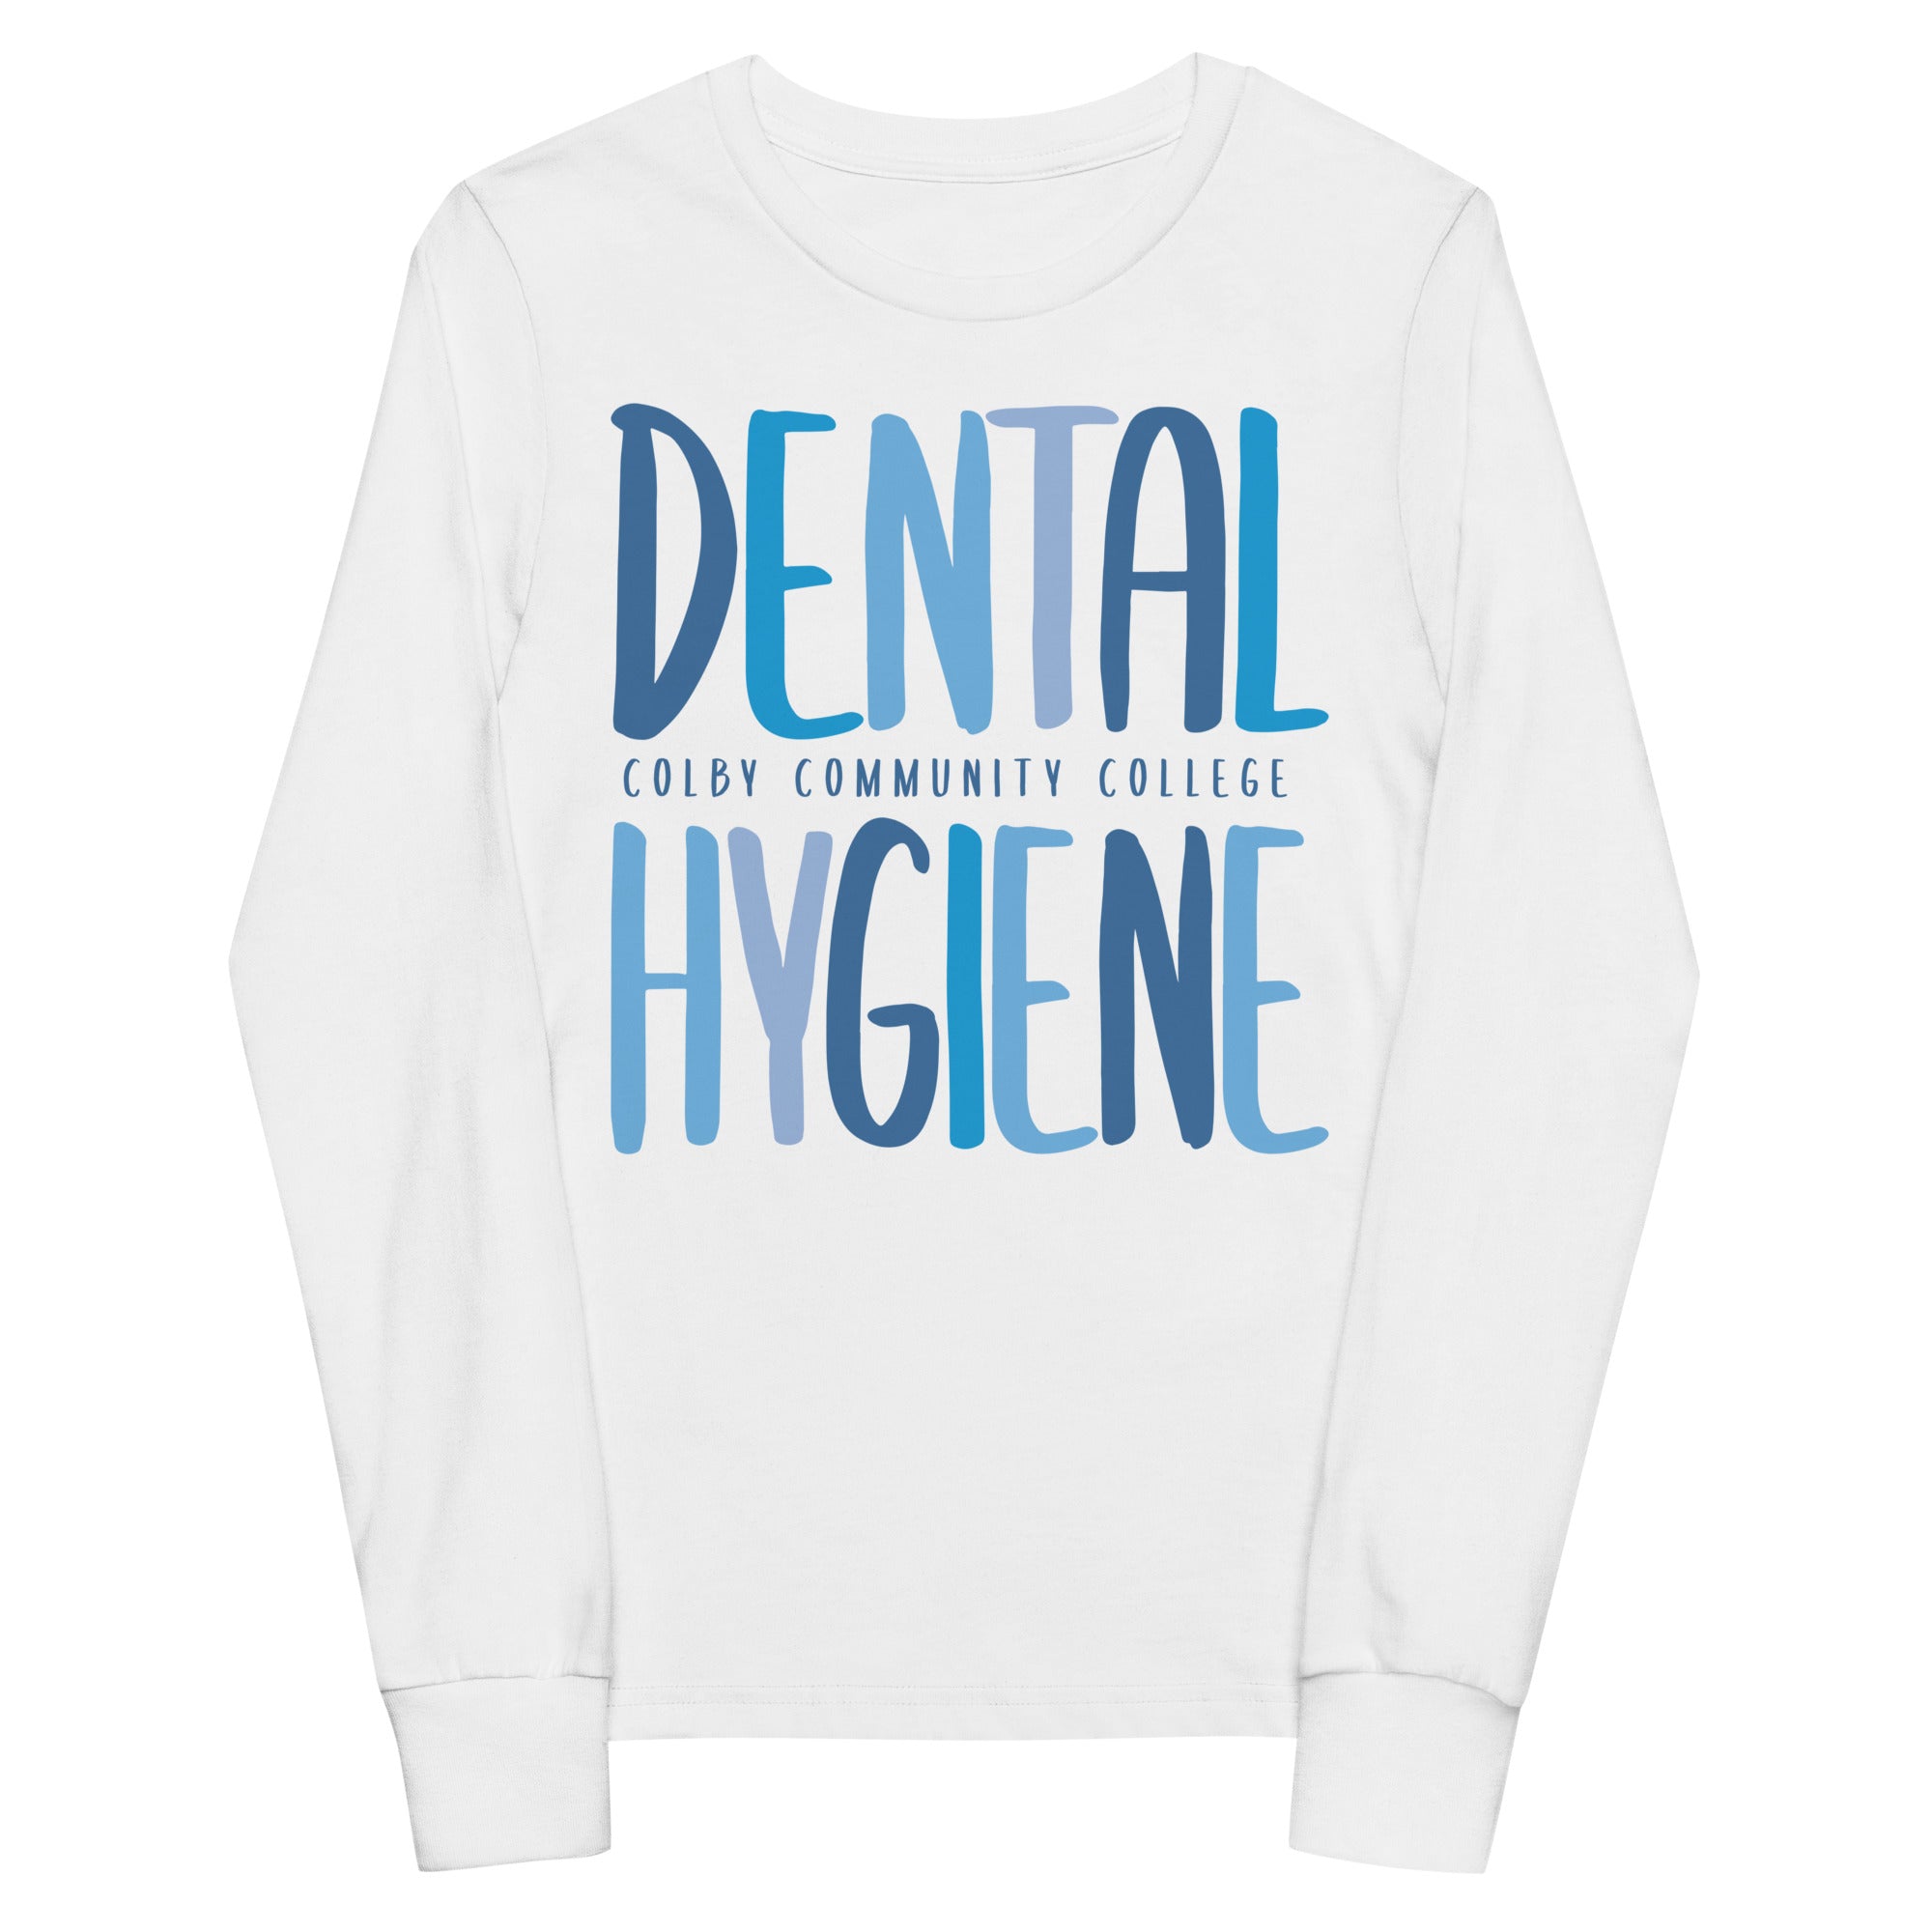 Colby Community College Dental Hygiene Youth long sleeve tee